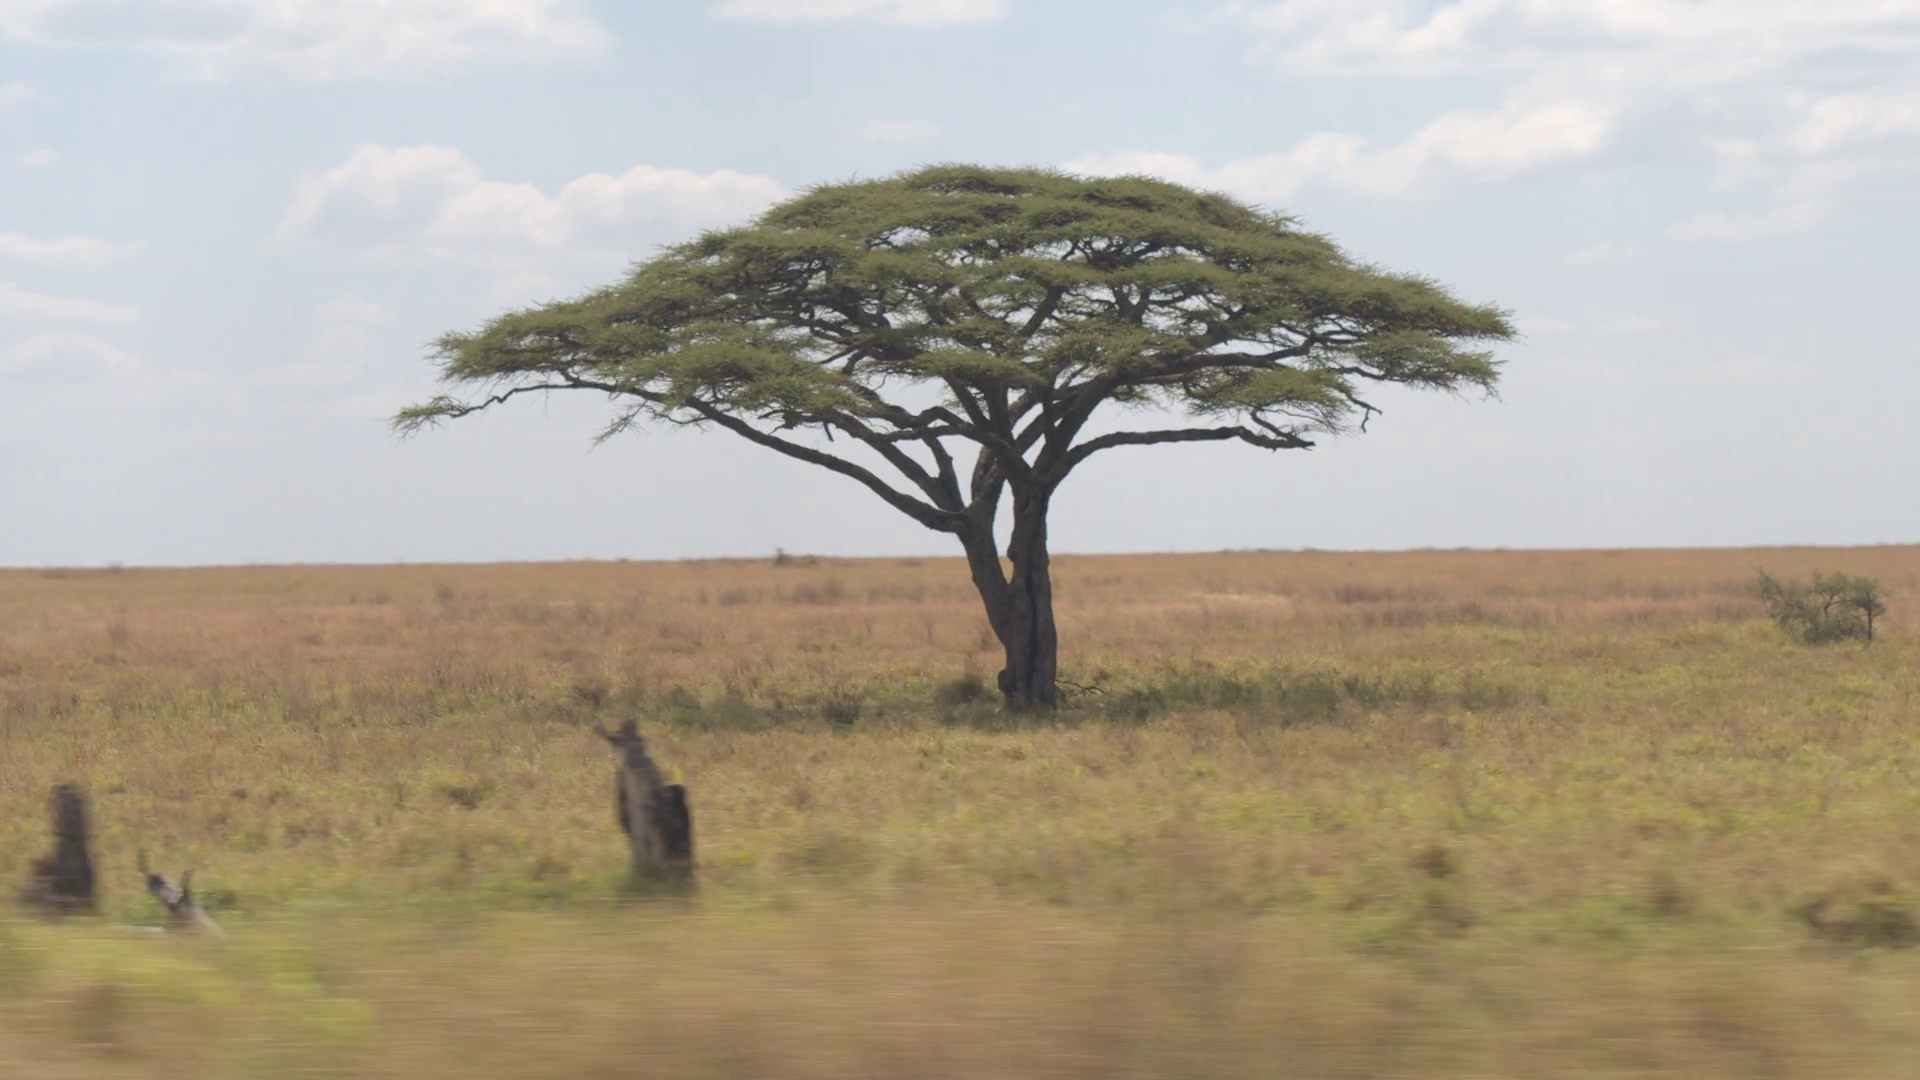 CLOSE UP: Lush acacia tree canopy in the middle of savanna grassland ...